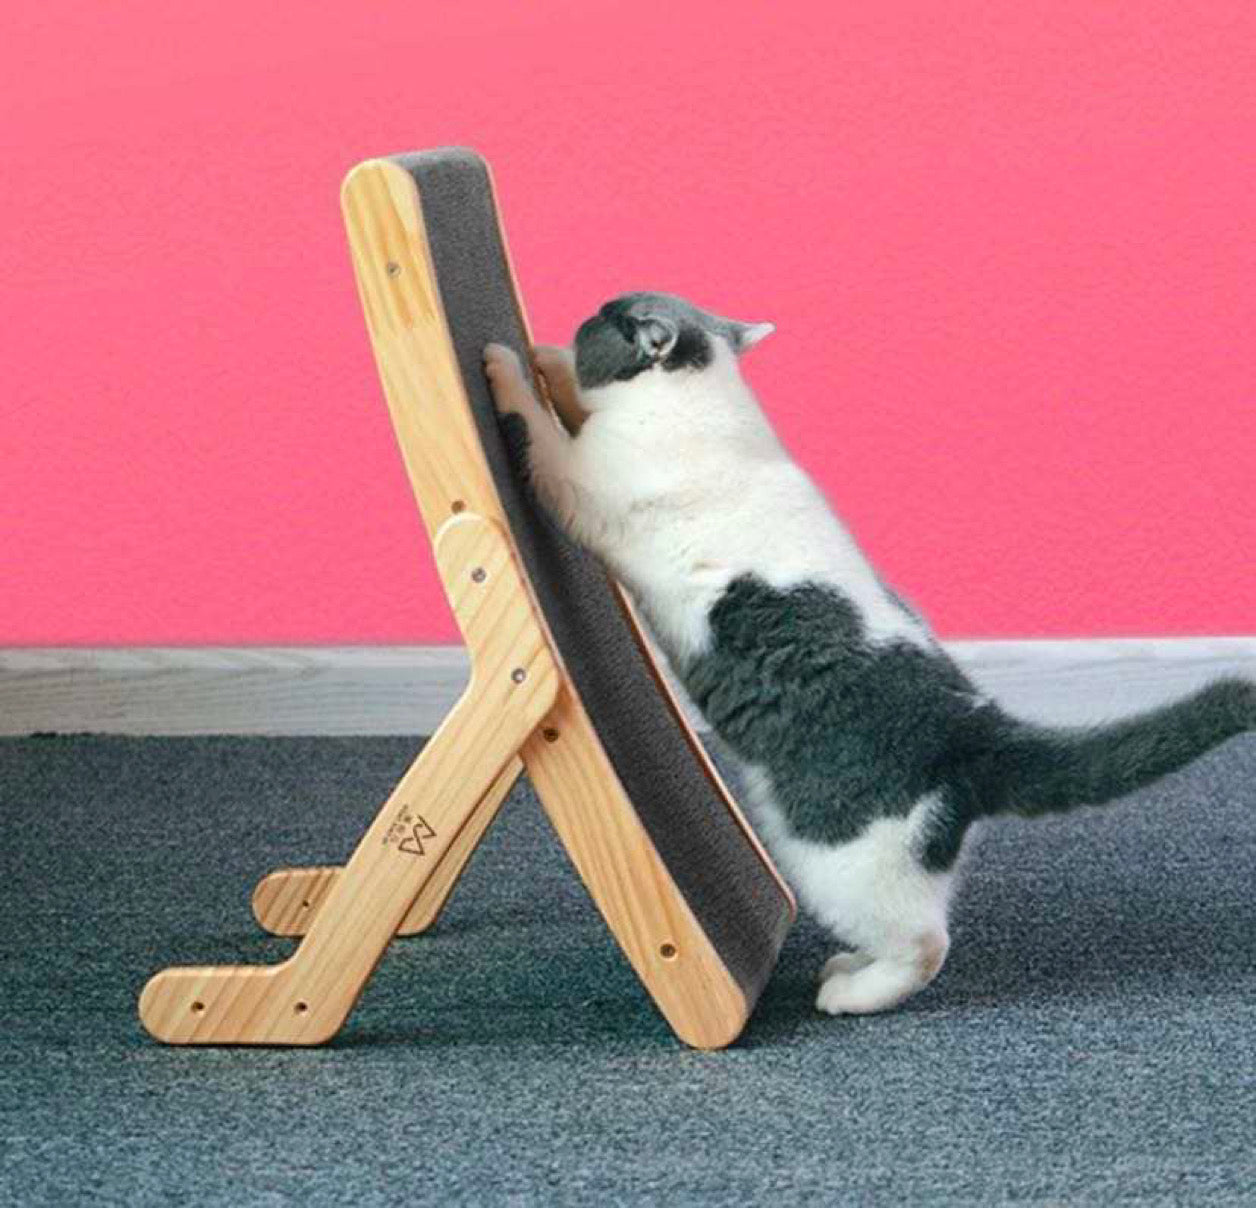 This adjustable wooden cat scratcher is well designed, comfortable, and multi-functional. The scratching board has a reversible design and is equipped with an anti-slip base ensuring a long-lasting use. It can be adjusted in different positions making it fun, playful, and enjoyable to your furr-baby.